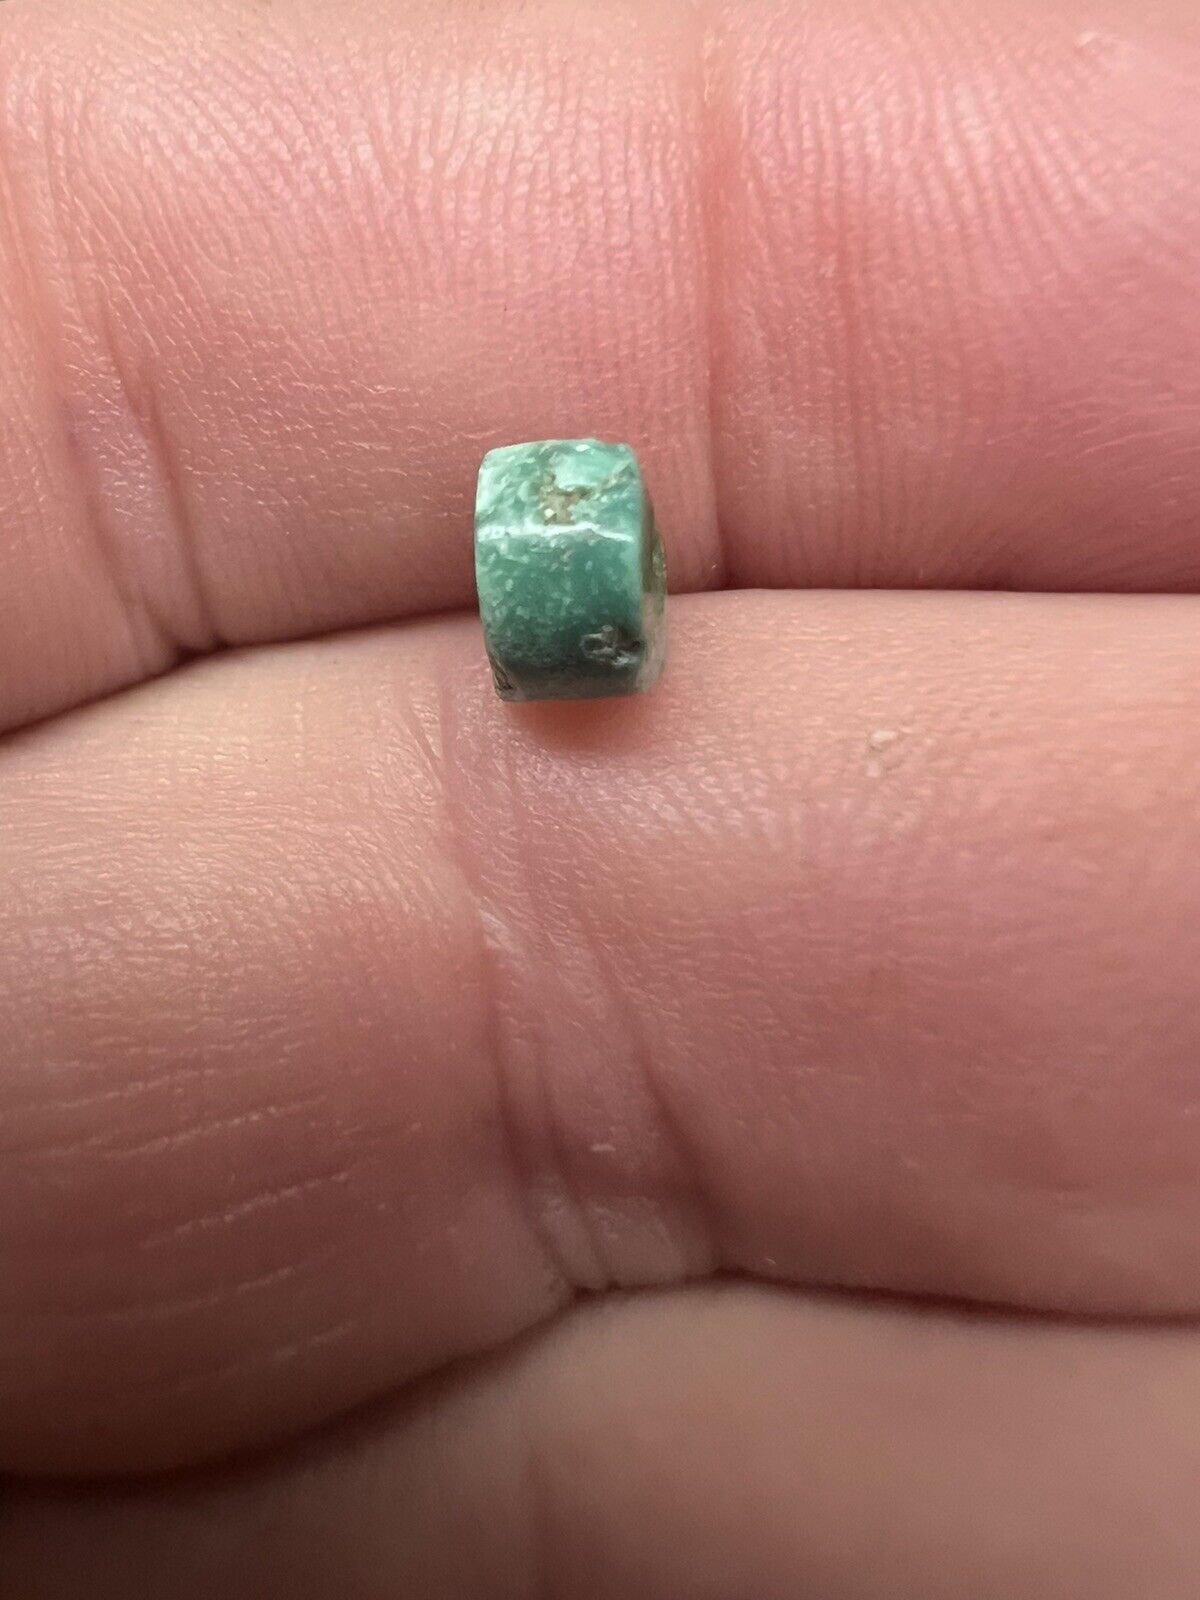 Ancient Pre-Columbian Small Turquoise Disk Bead 6.6 X 4.4 mm Collectible rare